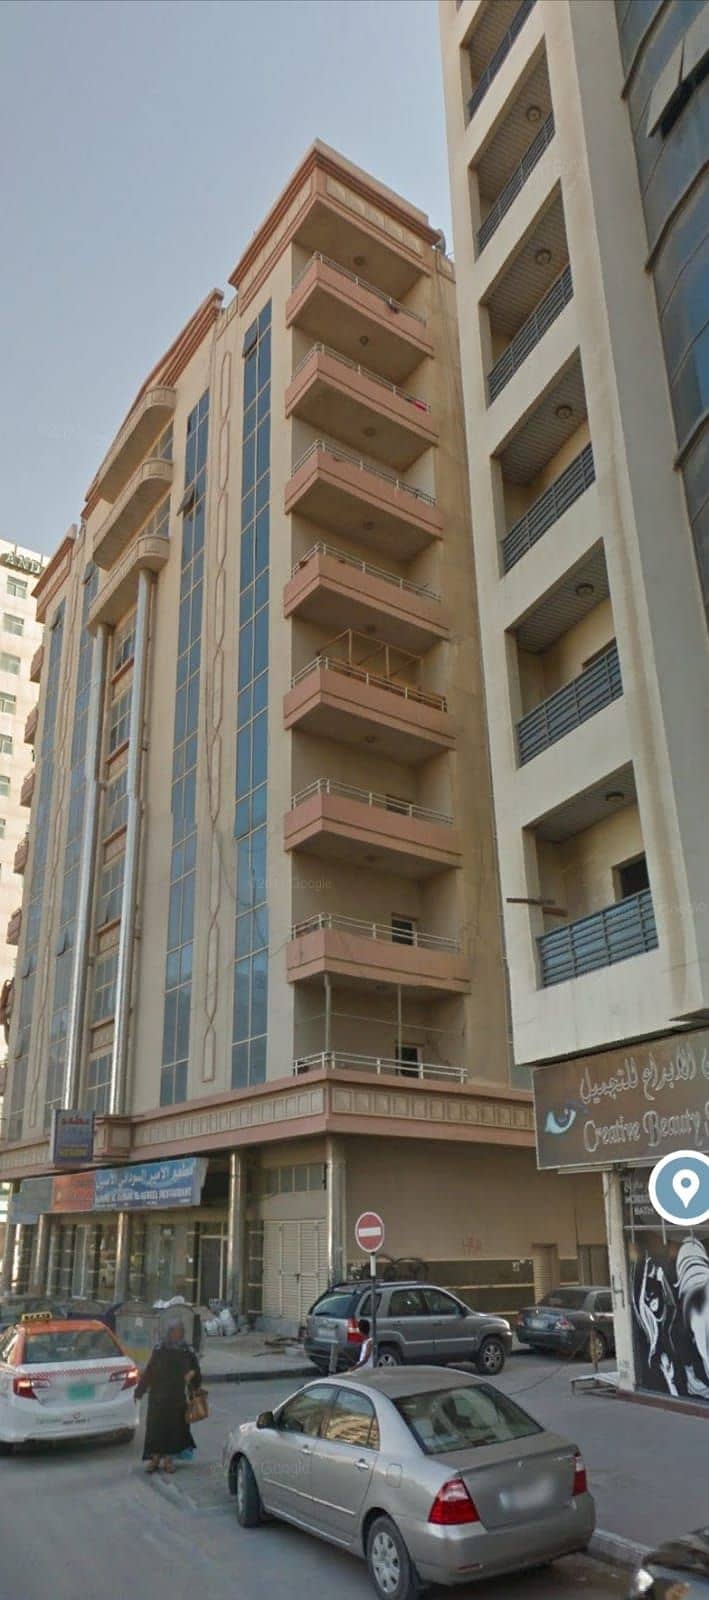 Building for sale ground + 8 floors for sale with an income of 10% freehold